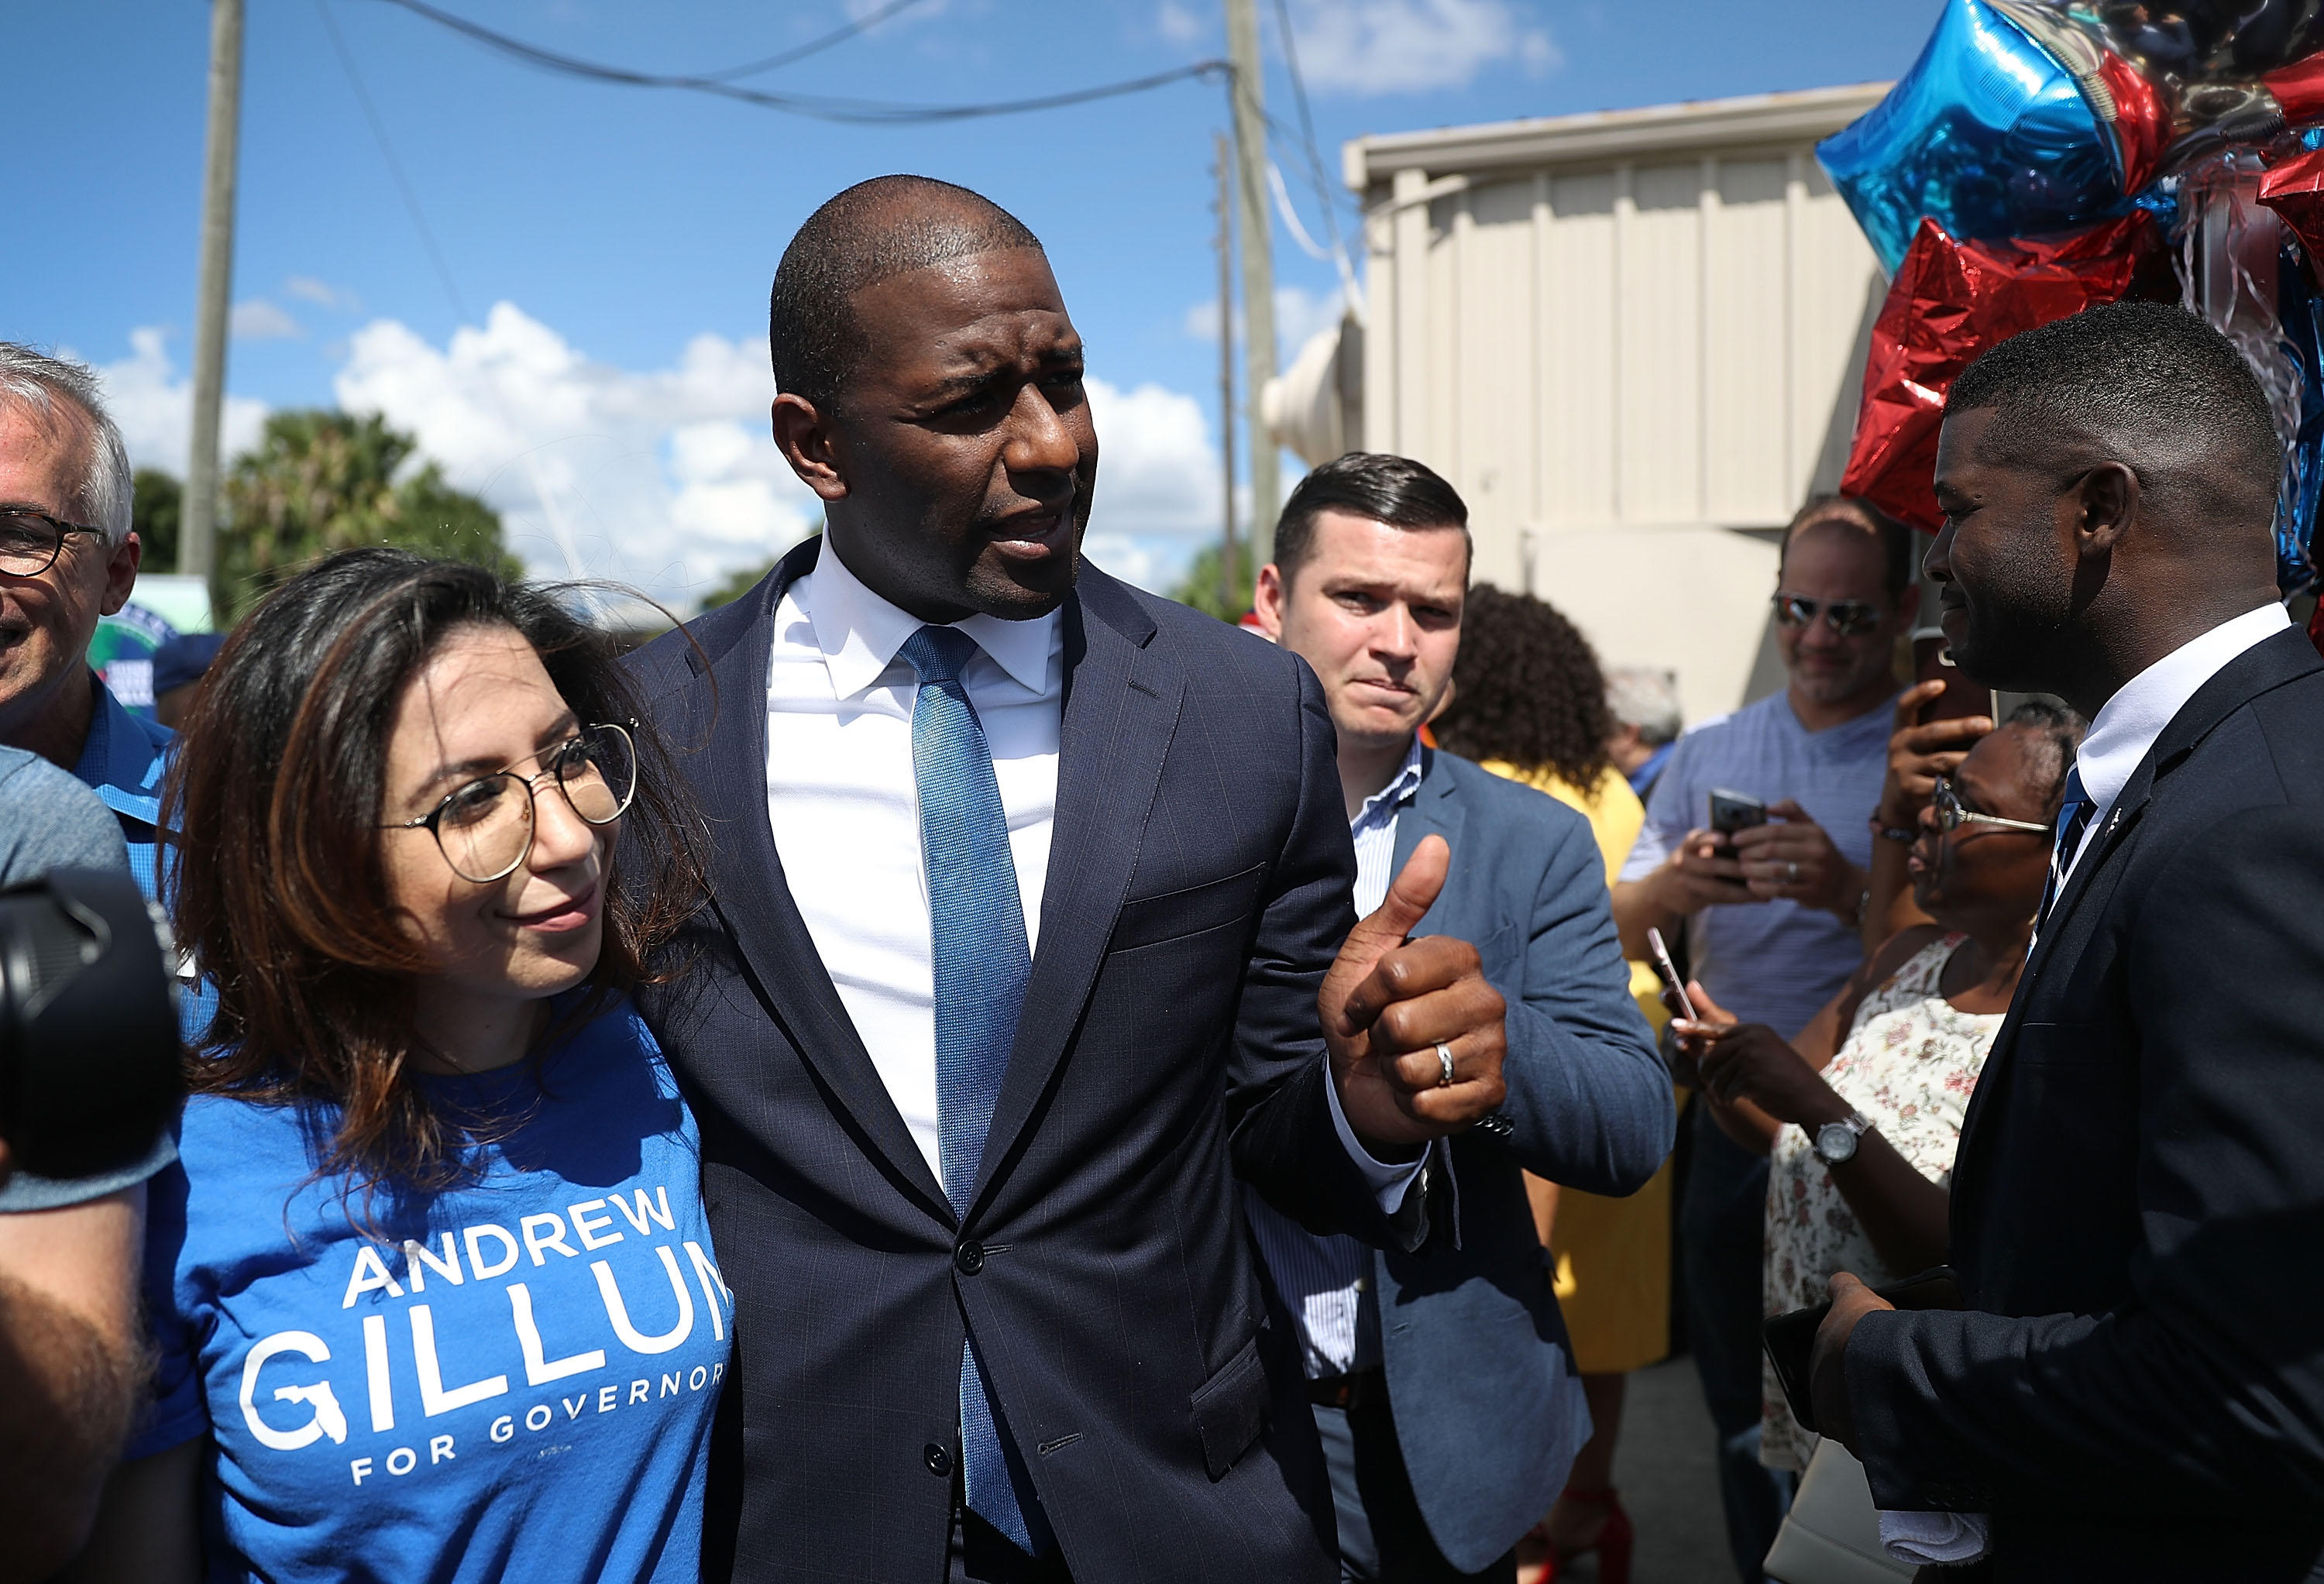 Andrew Gillum as he campaigned for governor in 2018. (CBS News photo)